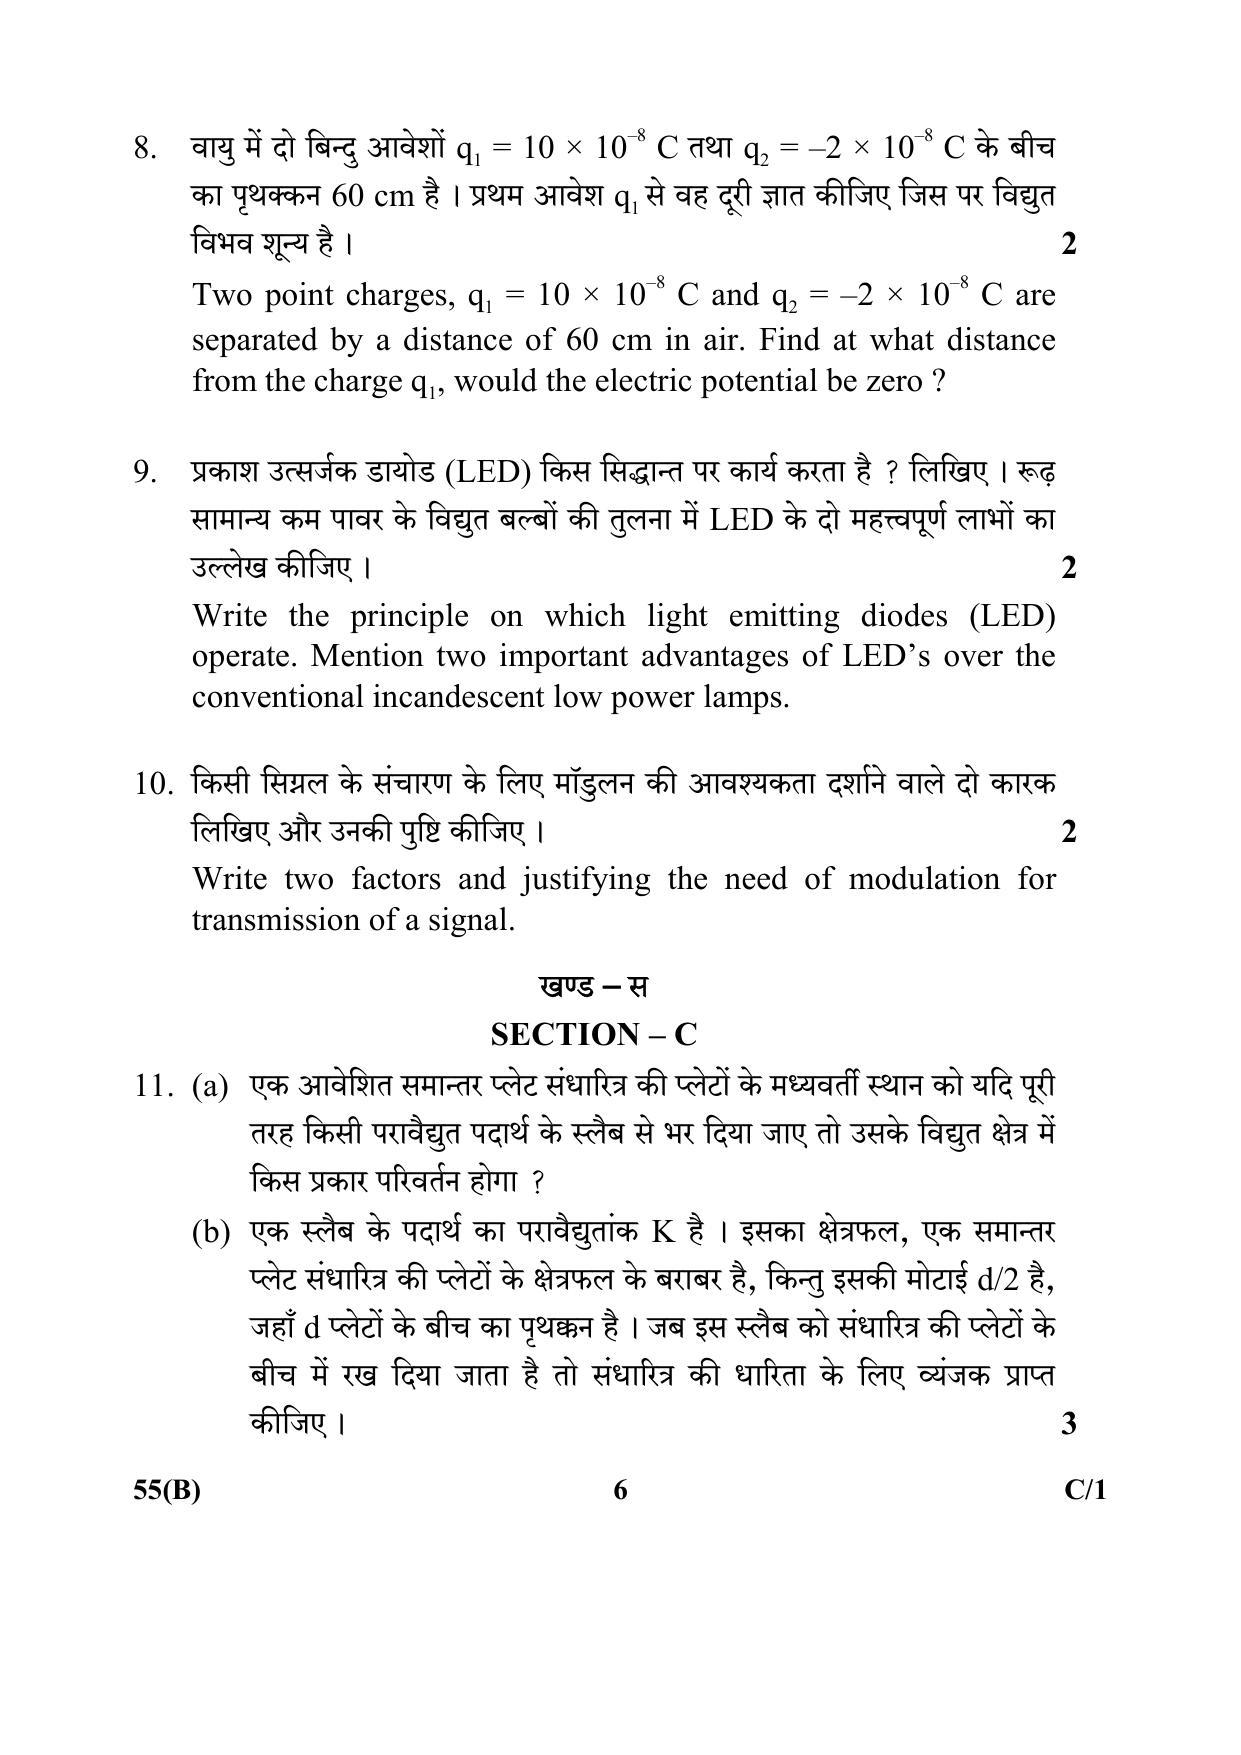 CBSE Class 12 55(B) (Physics) 2018 Compartment Question Paper - Page 6